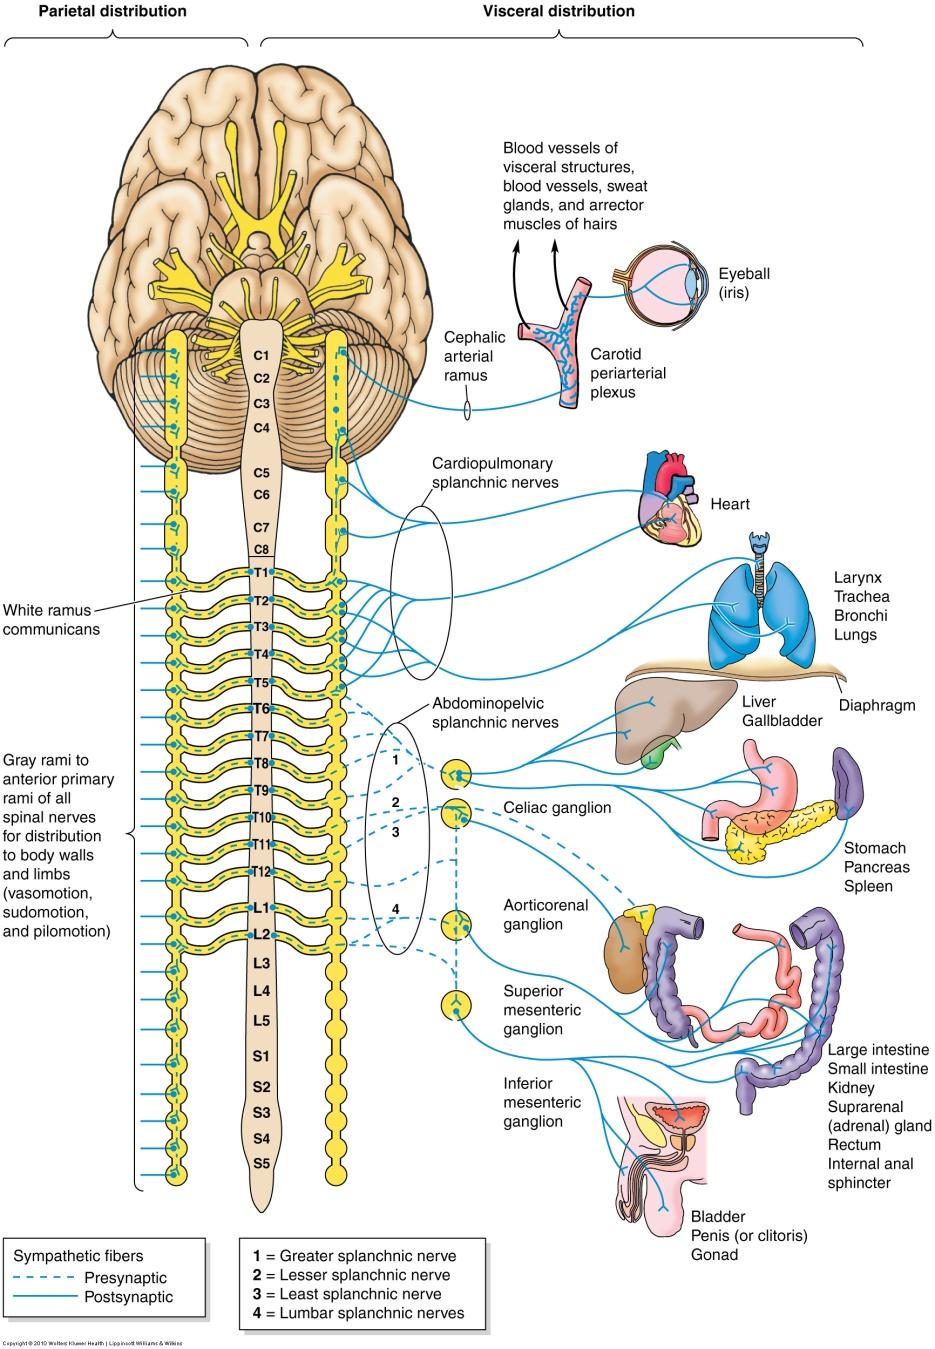 Sympathetic Nerves Some axons of the postganglionic neurons leave the trunk by